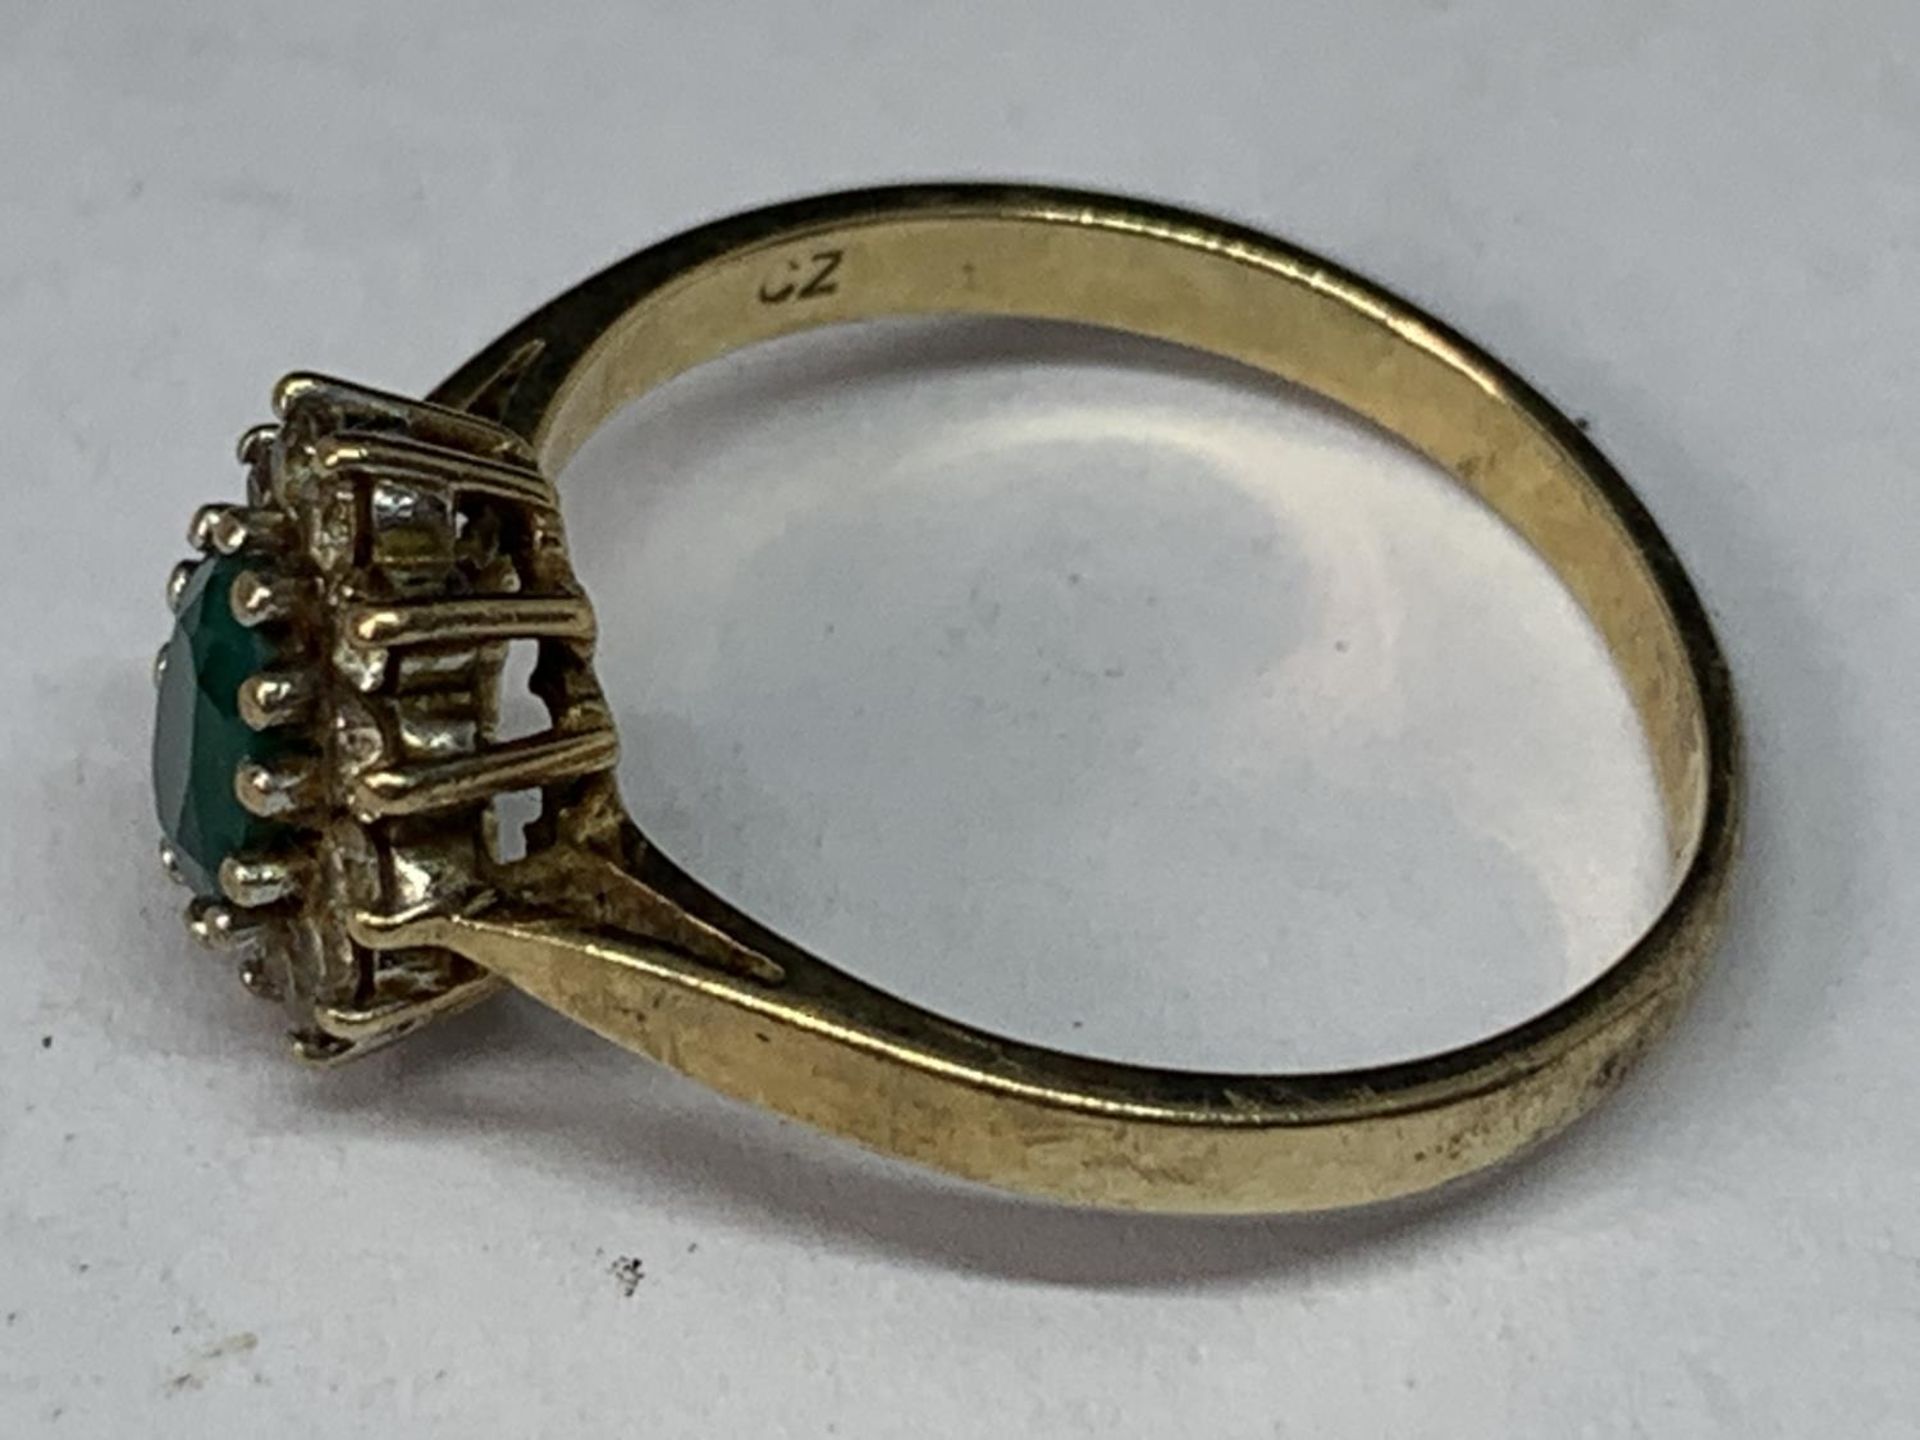 A 9 CARAT GOLD RING WITH CENTRE GREENSTONE SURROUNDED BY CUBIC ZIRCONIAS SIZE P - Image 2 of 3